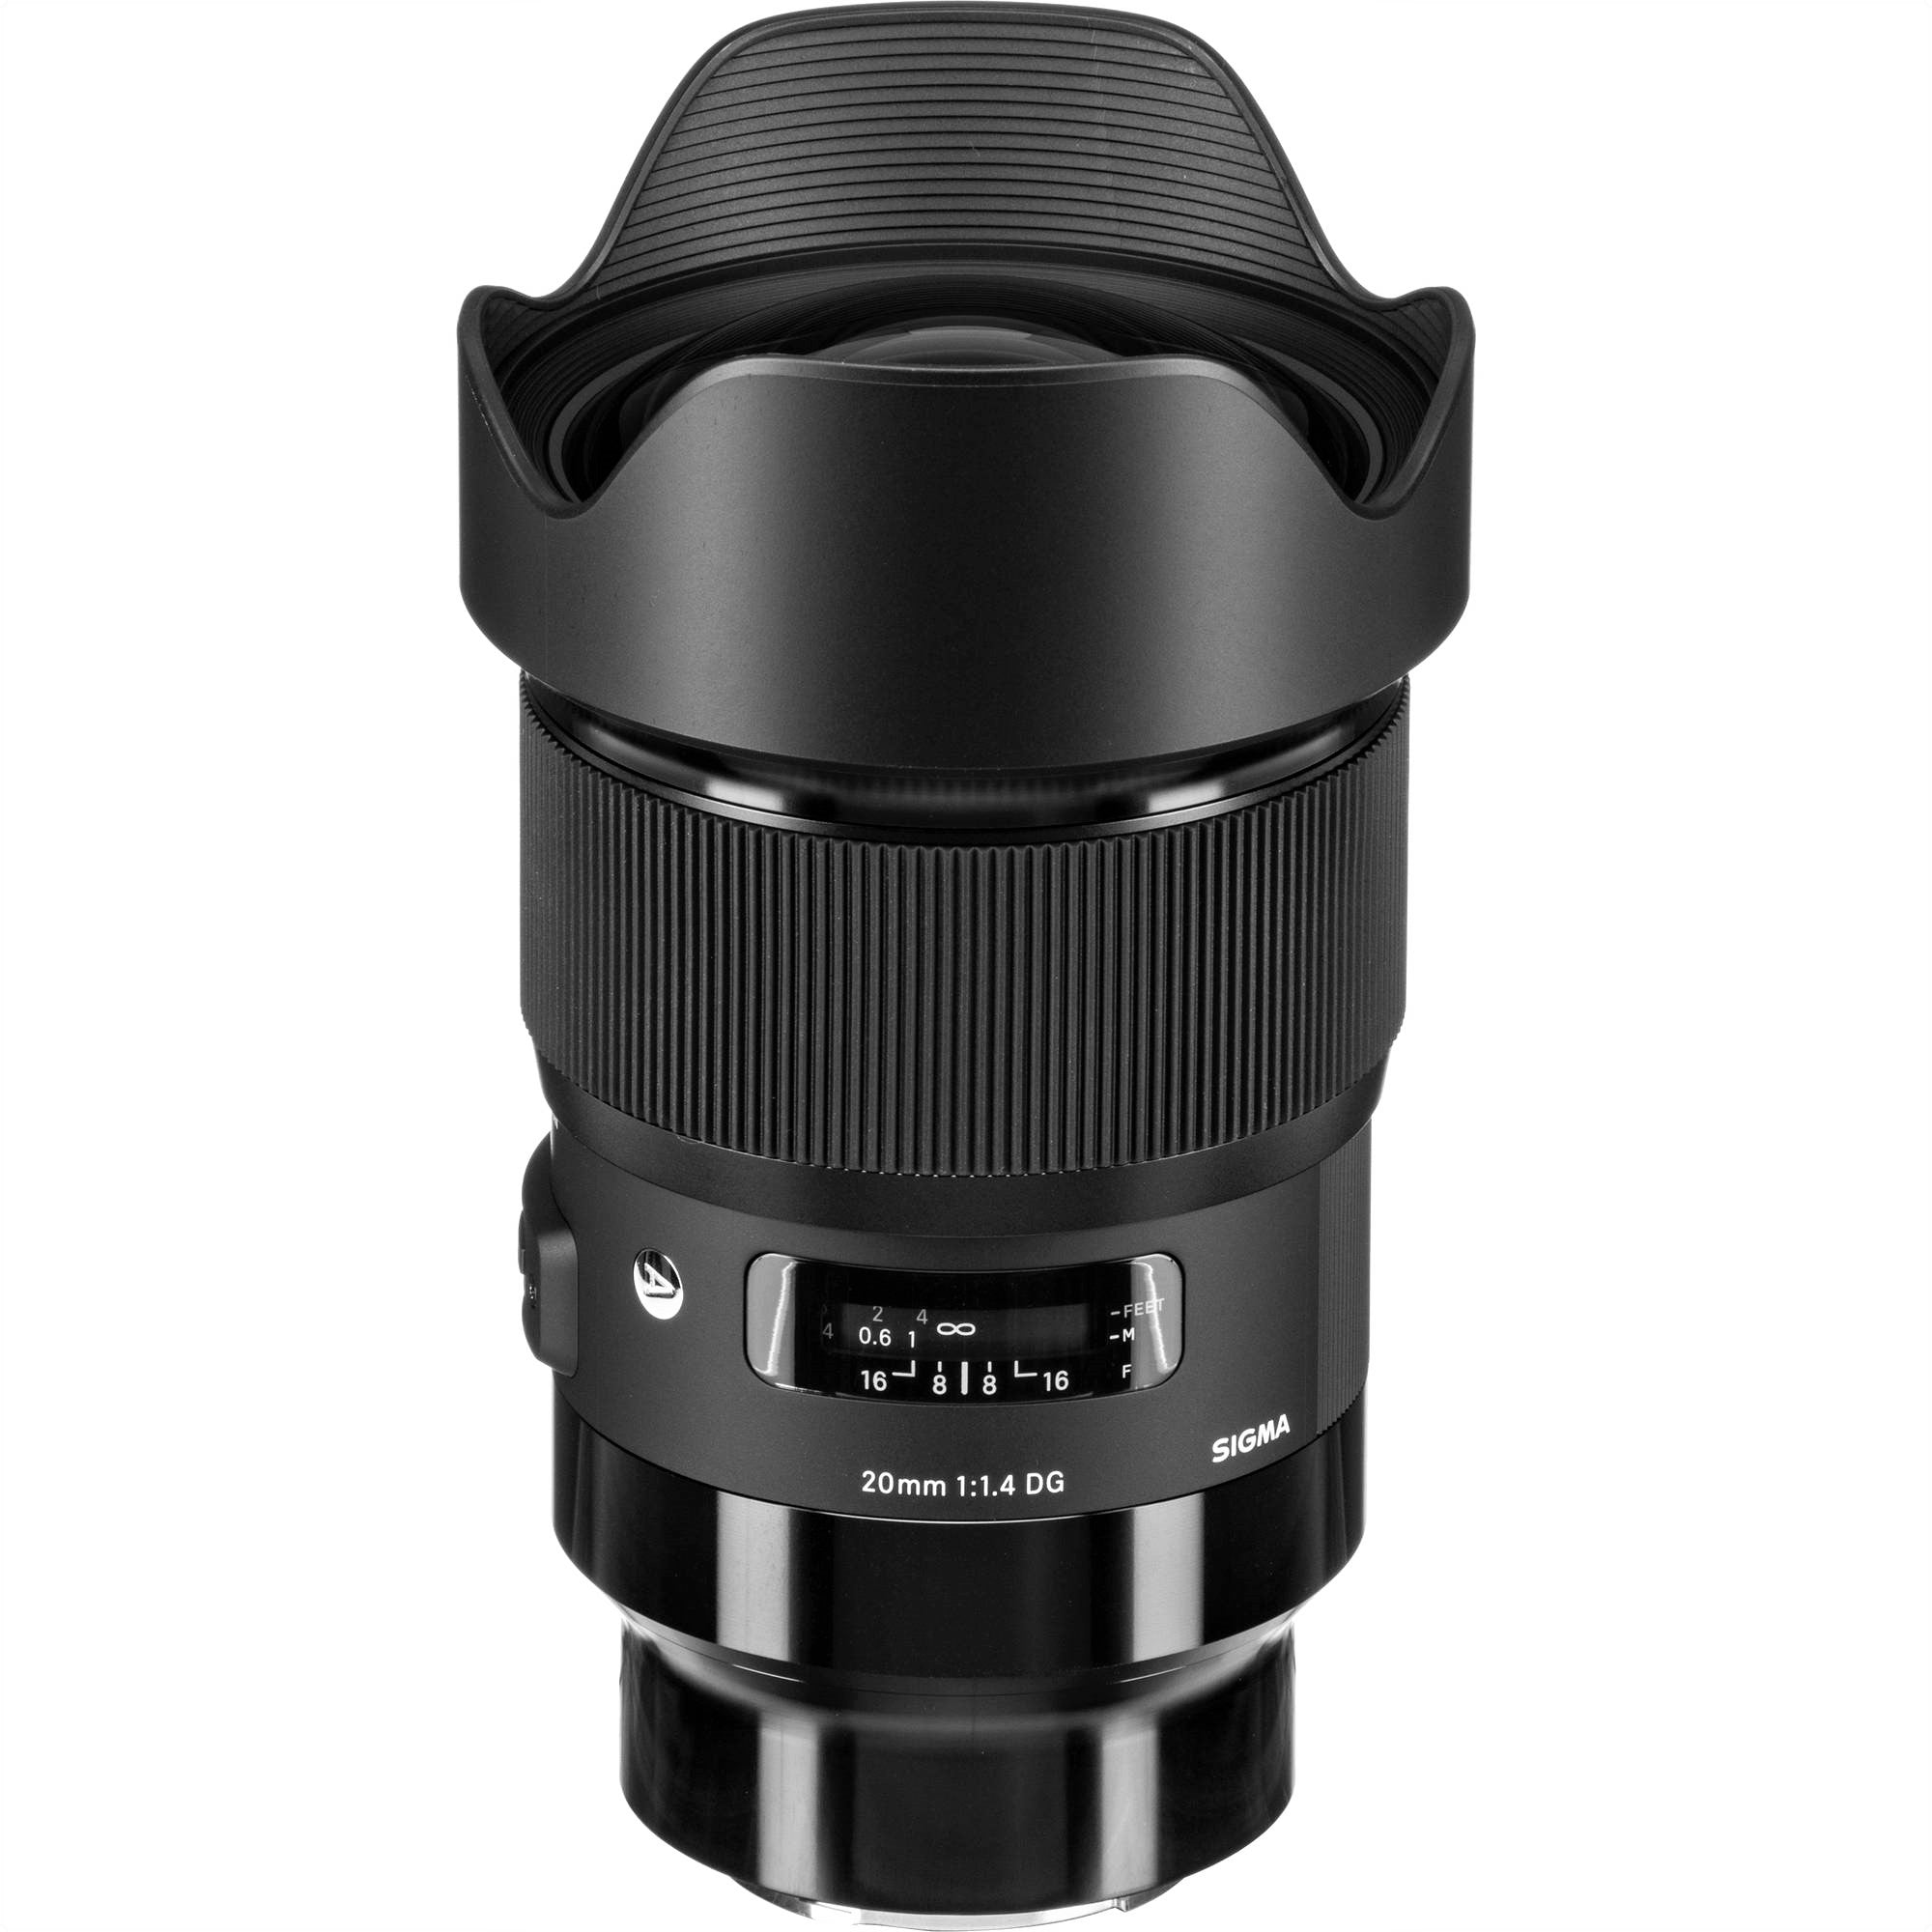 Sigma 20mm F1.4 DG HSM Art Lens for Sony E with Attached Lens Hood on the Top